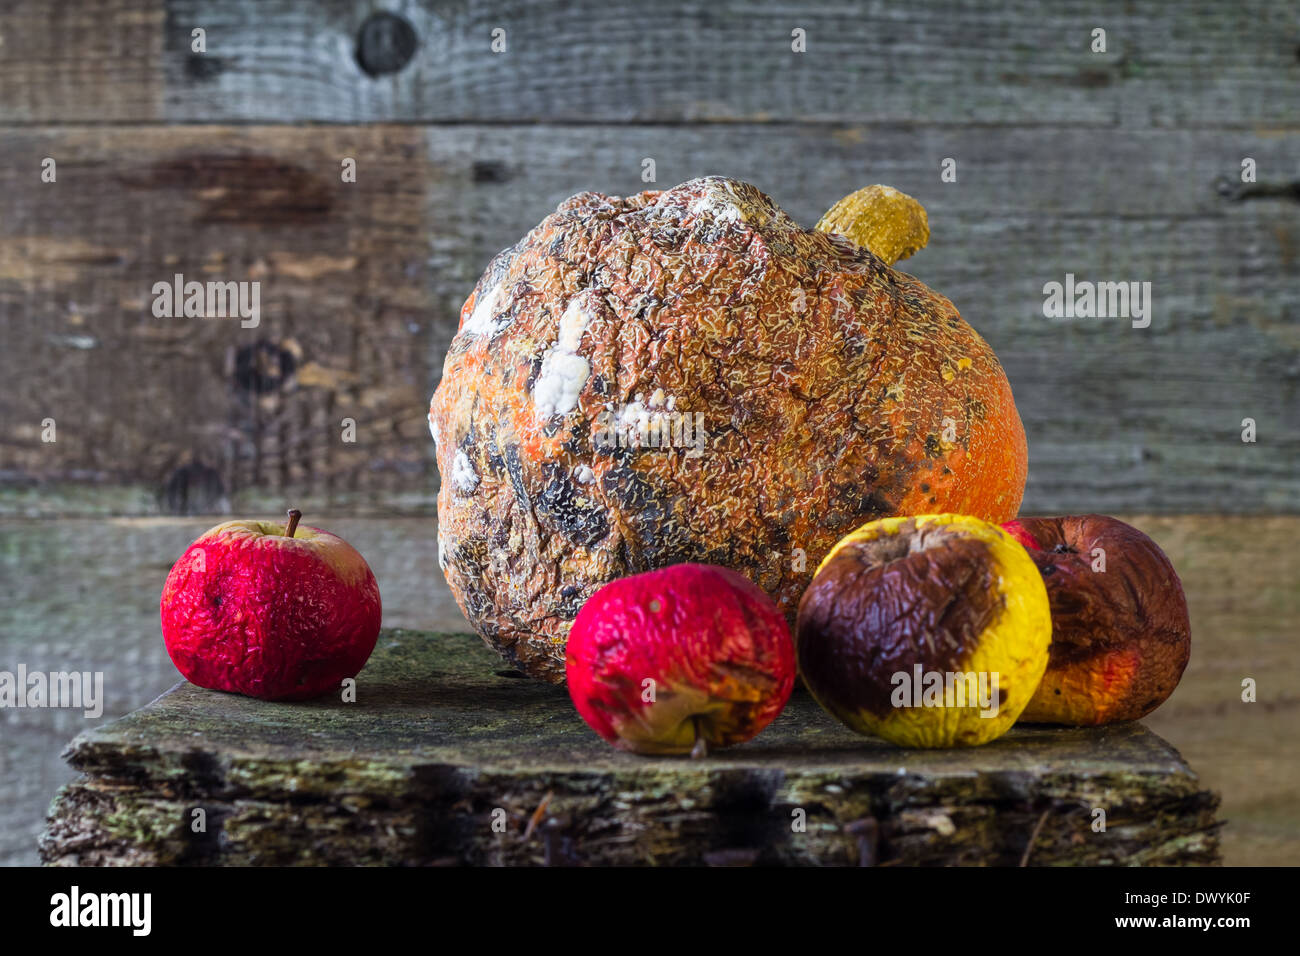 Old and rotten fruit on wooden board Stock Photo